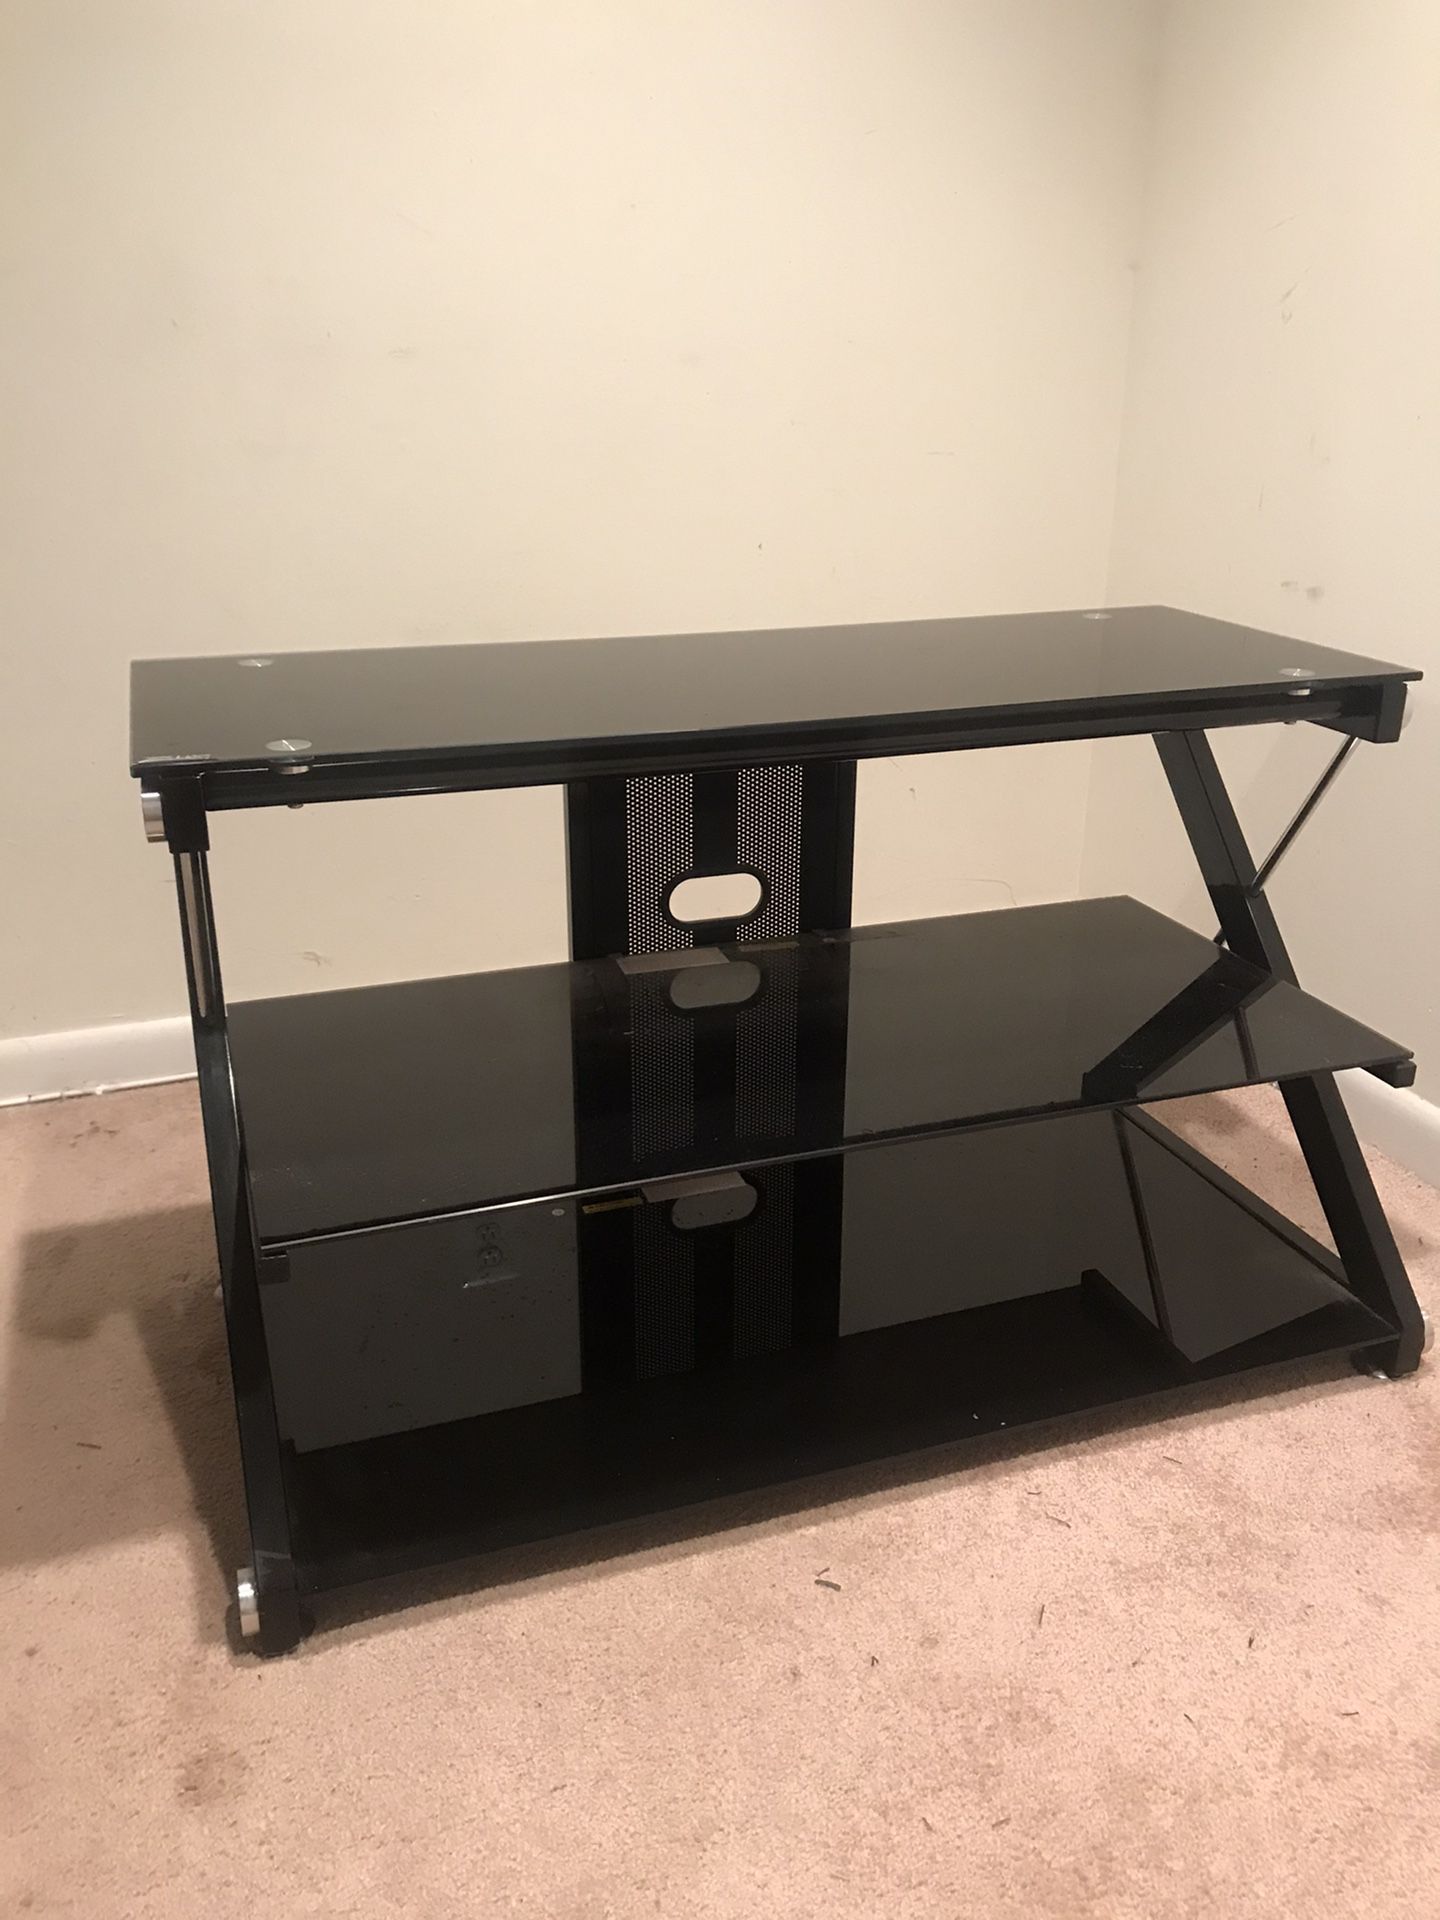 Great 40” TV stand for sale